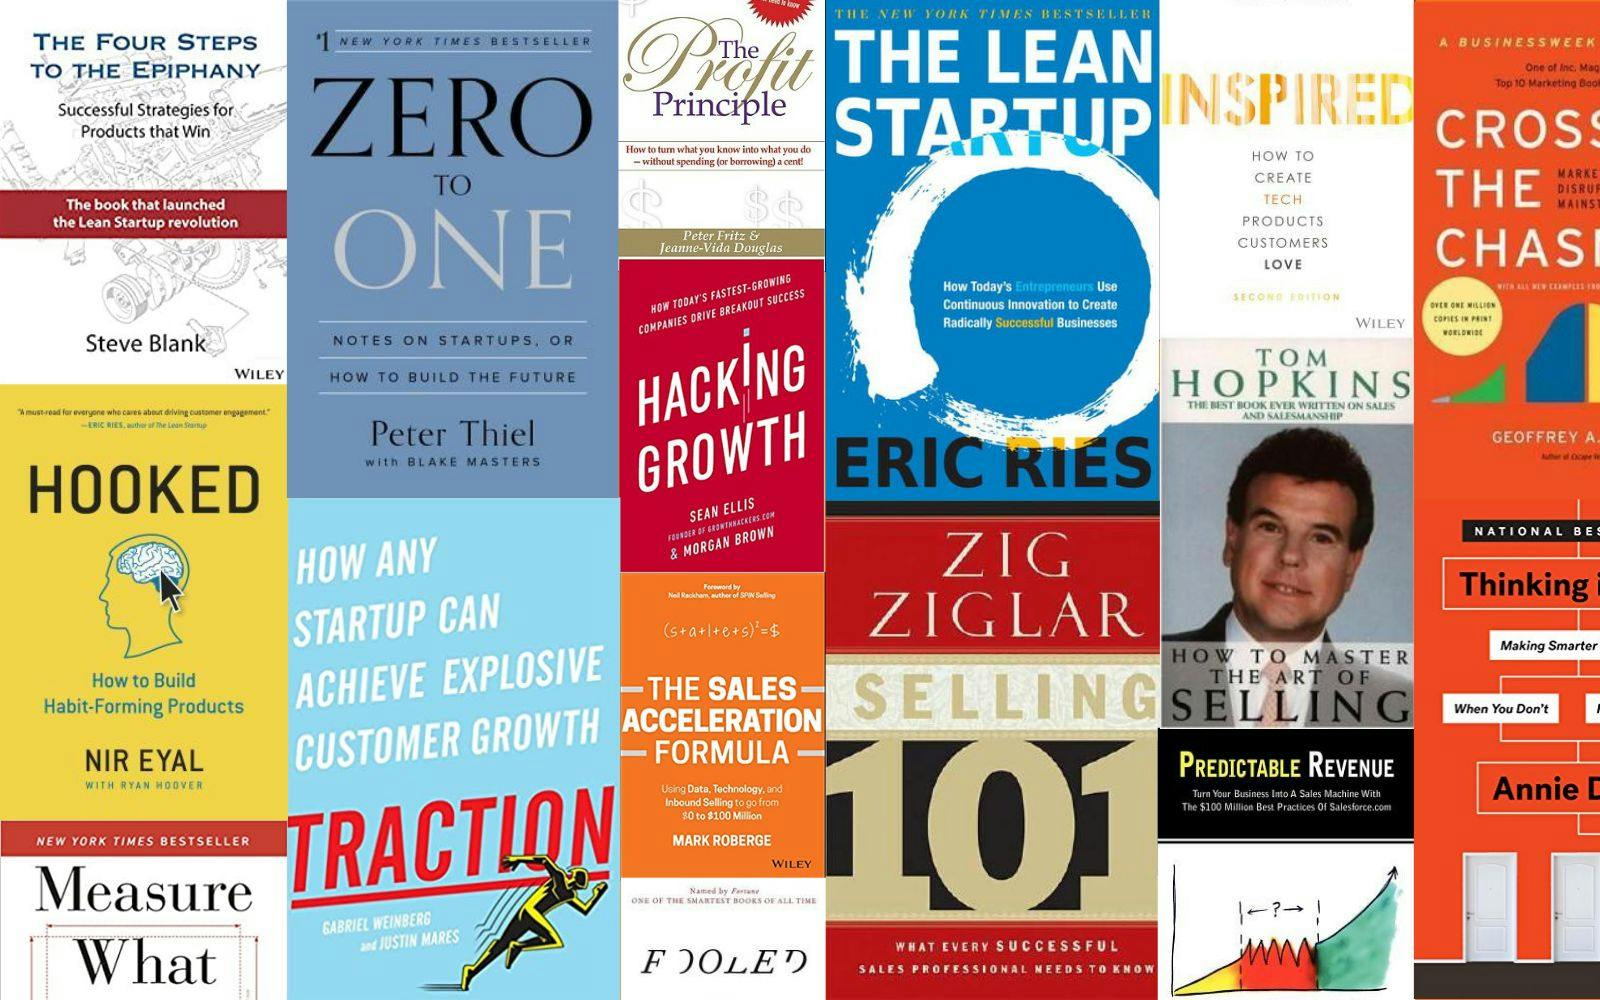 /getting-from-zero-to-one-must-read-books-for-building-new-product-ventures-sir33uv feature image